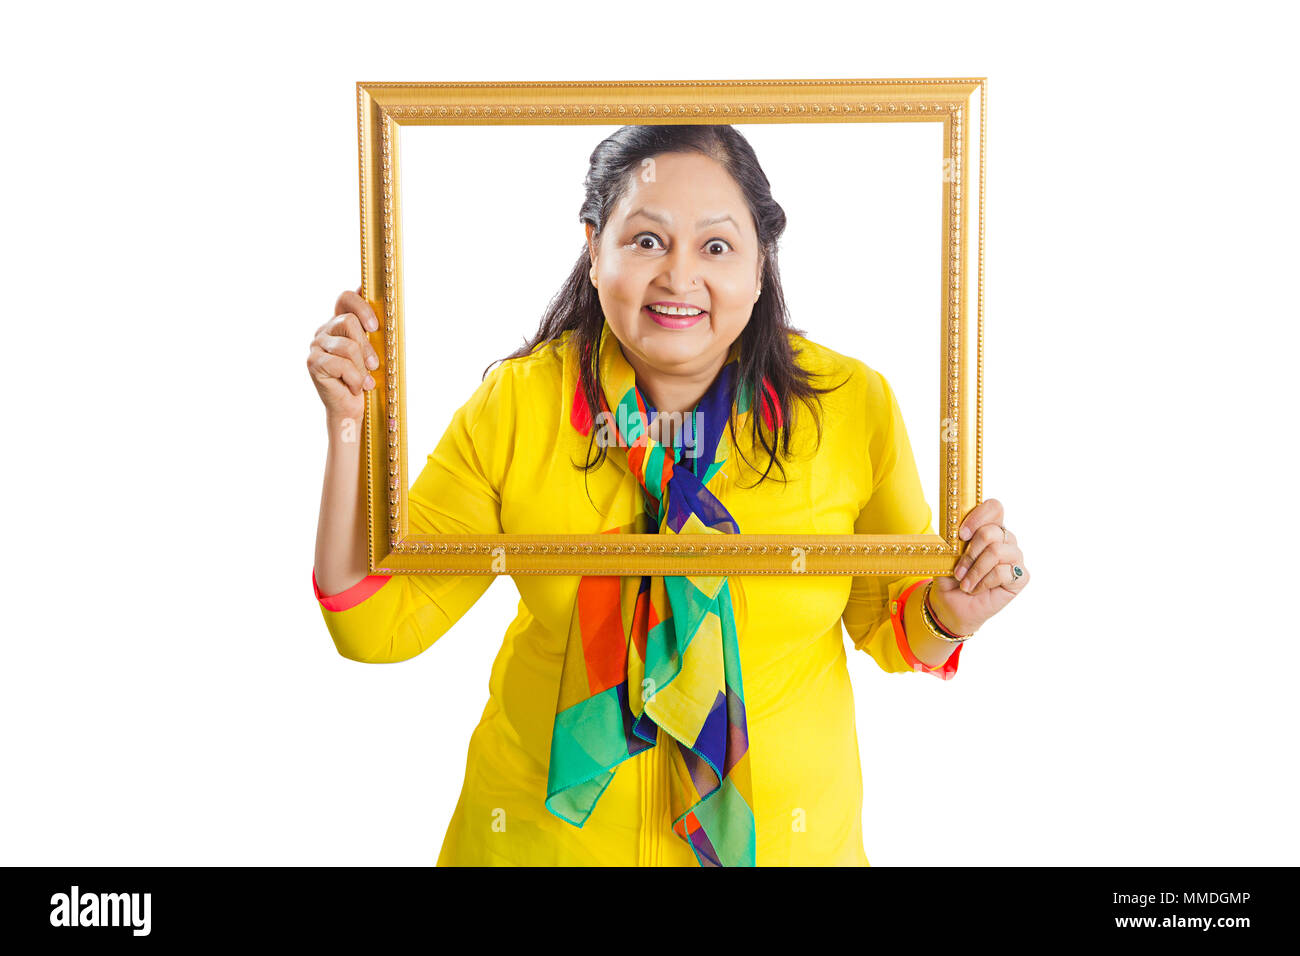 Excited One Old Female Holding Picture Frame and looking through. Stock Photo